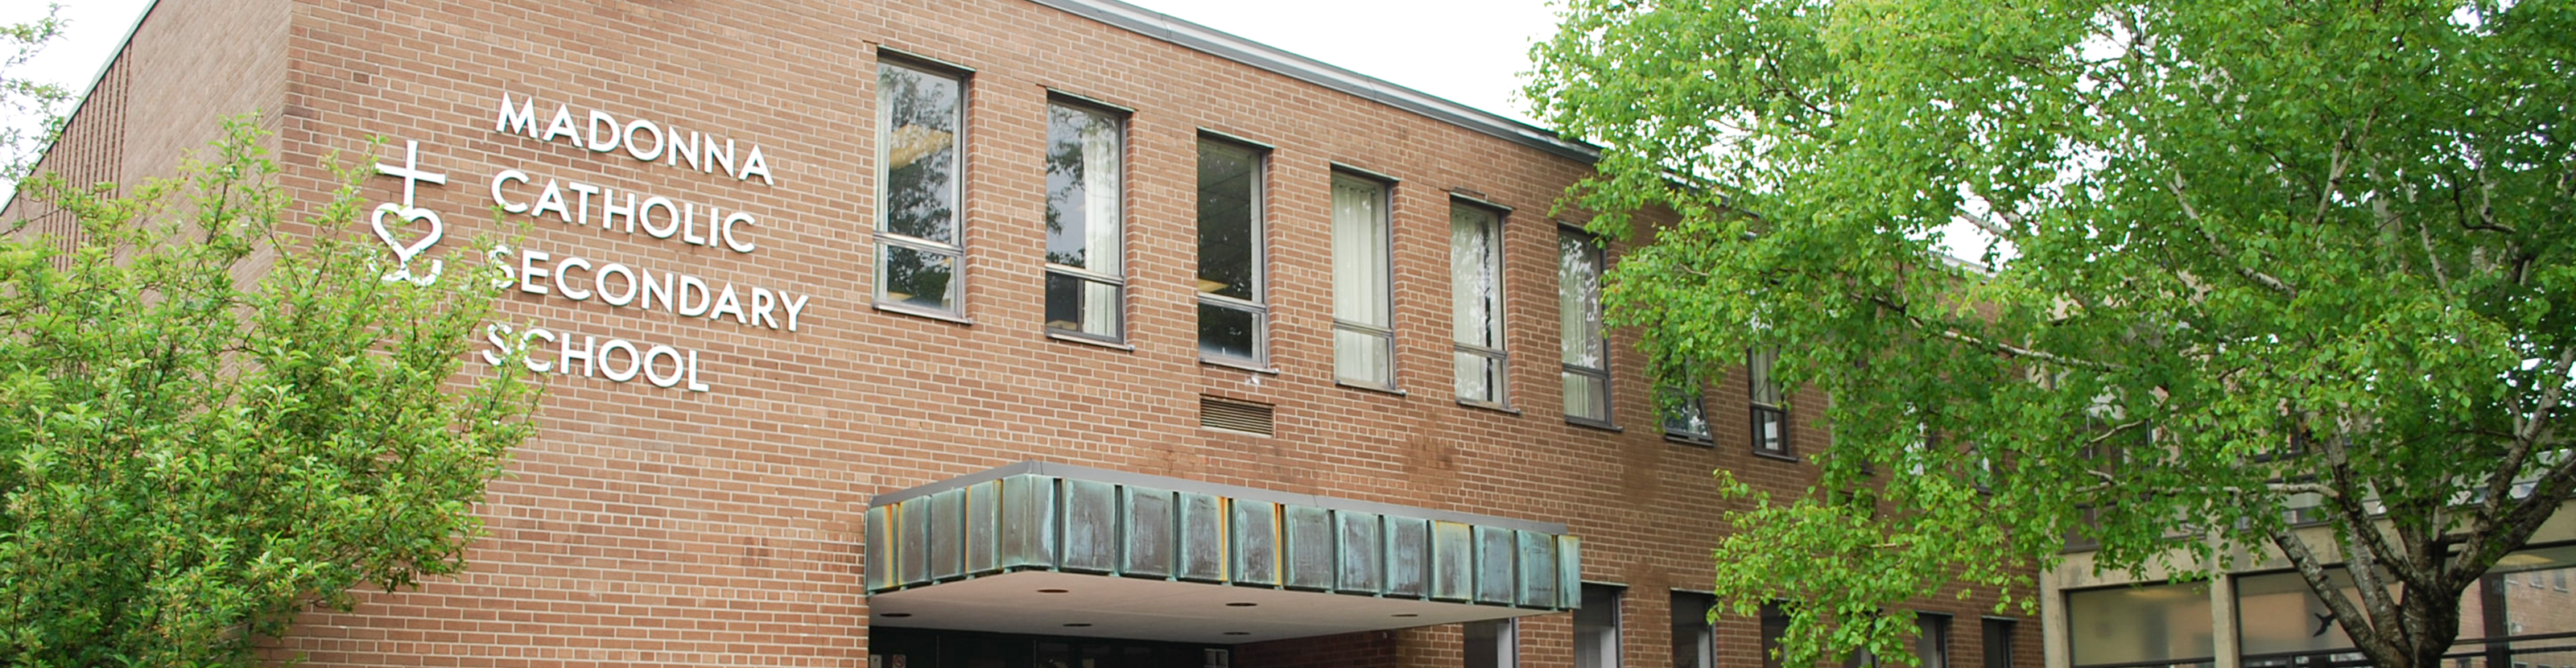 The front of the Madonna Catholic Secondary School building.